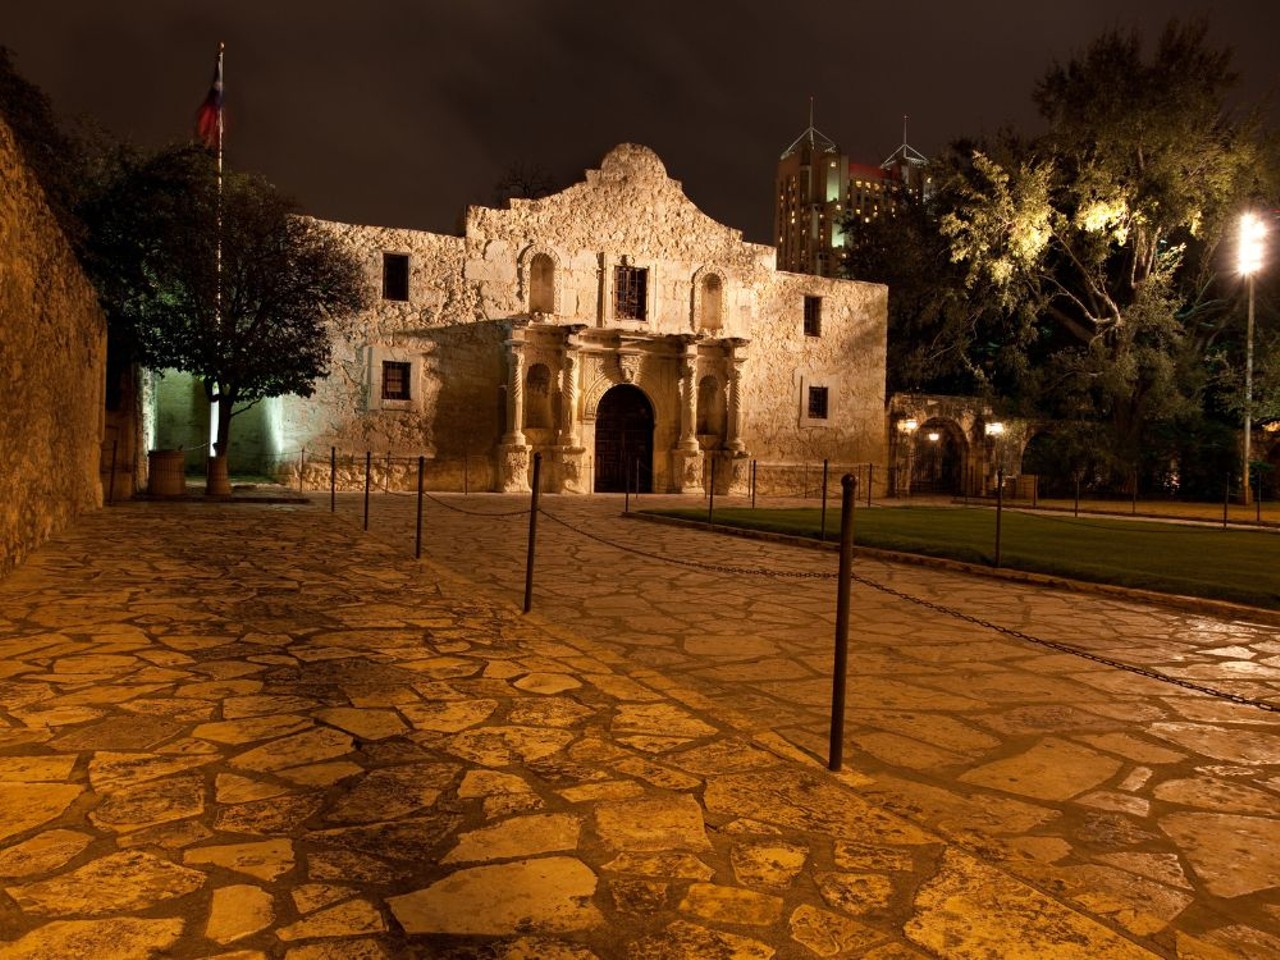 The Alamo
It should come as no surprise that the Alamo is said to be very haunted. According to TPR, ghosts that have been seen at the historic site include soldiers as well as a small child that purportedly wanders the grounds.